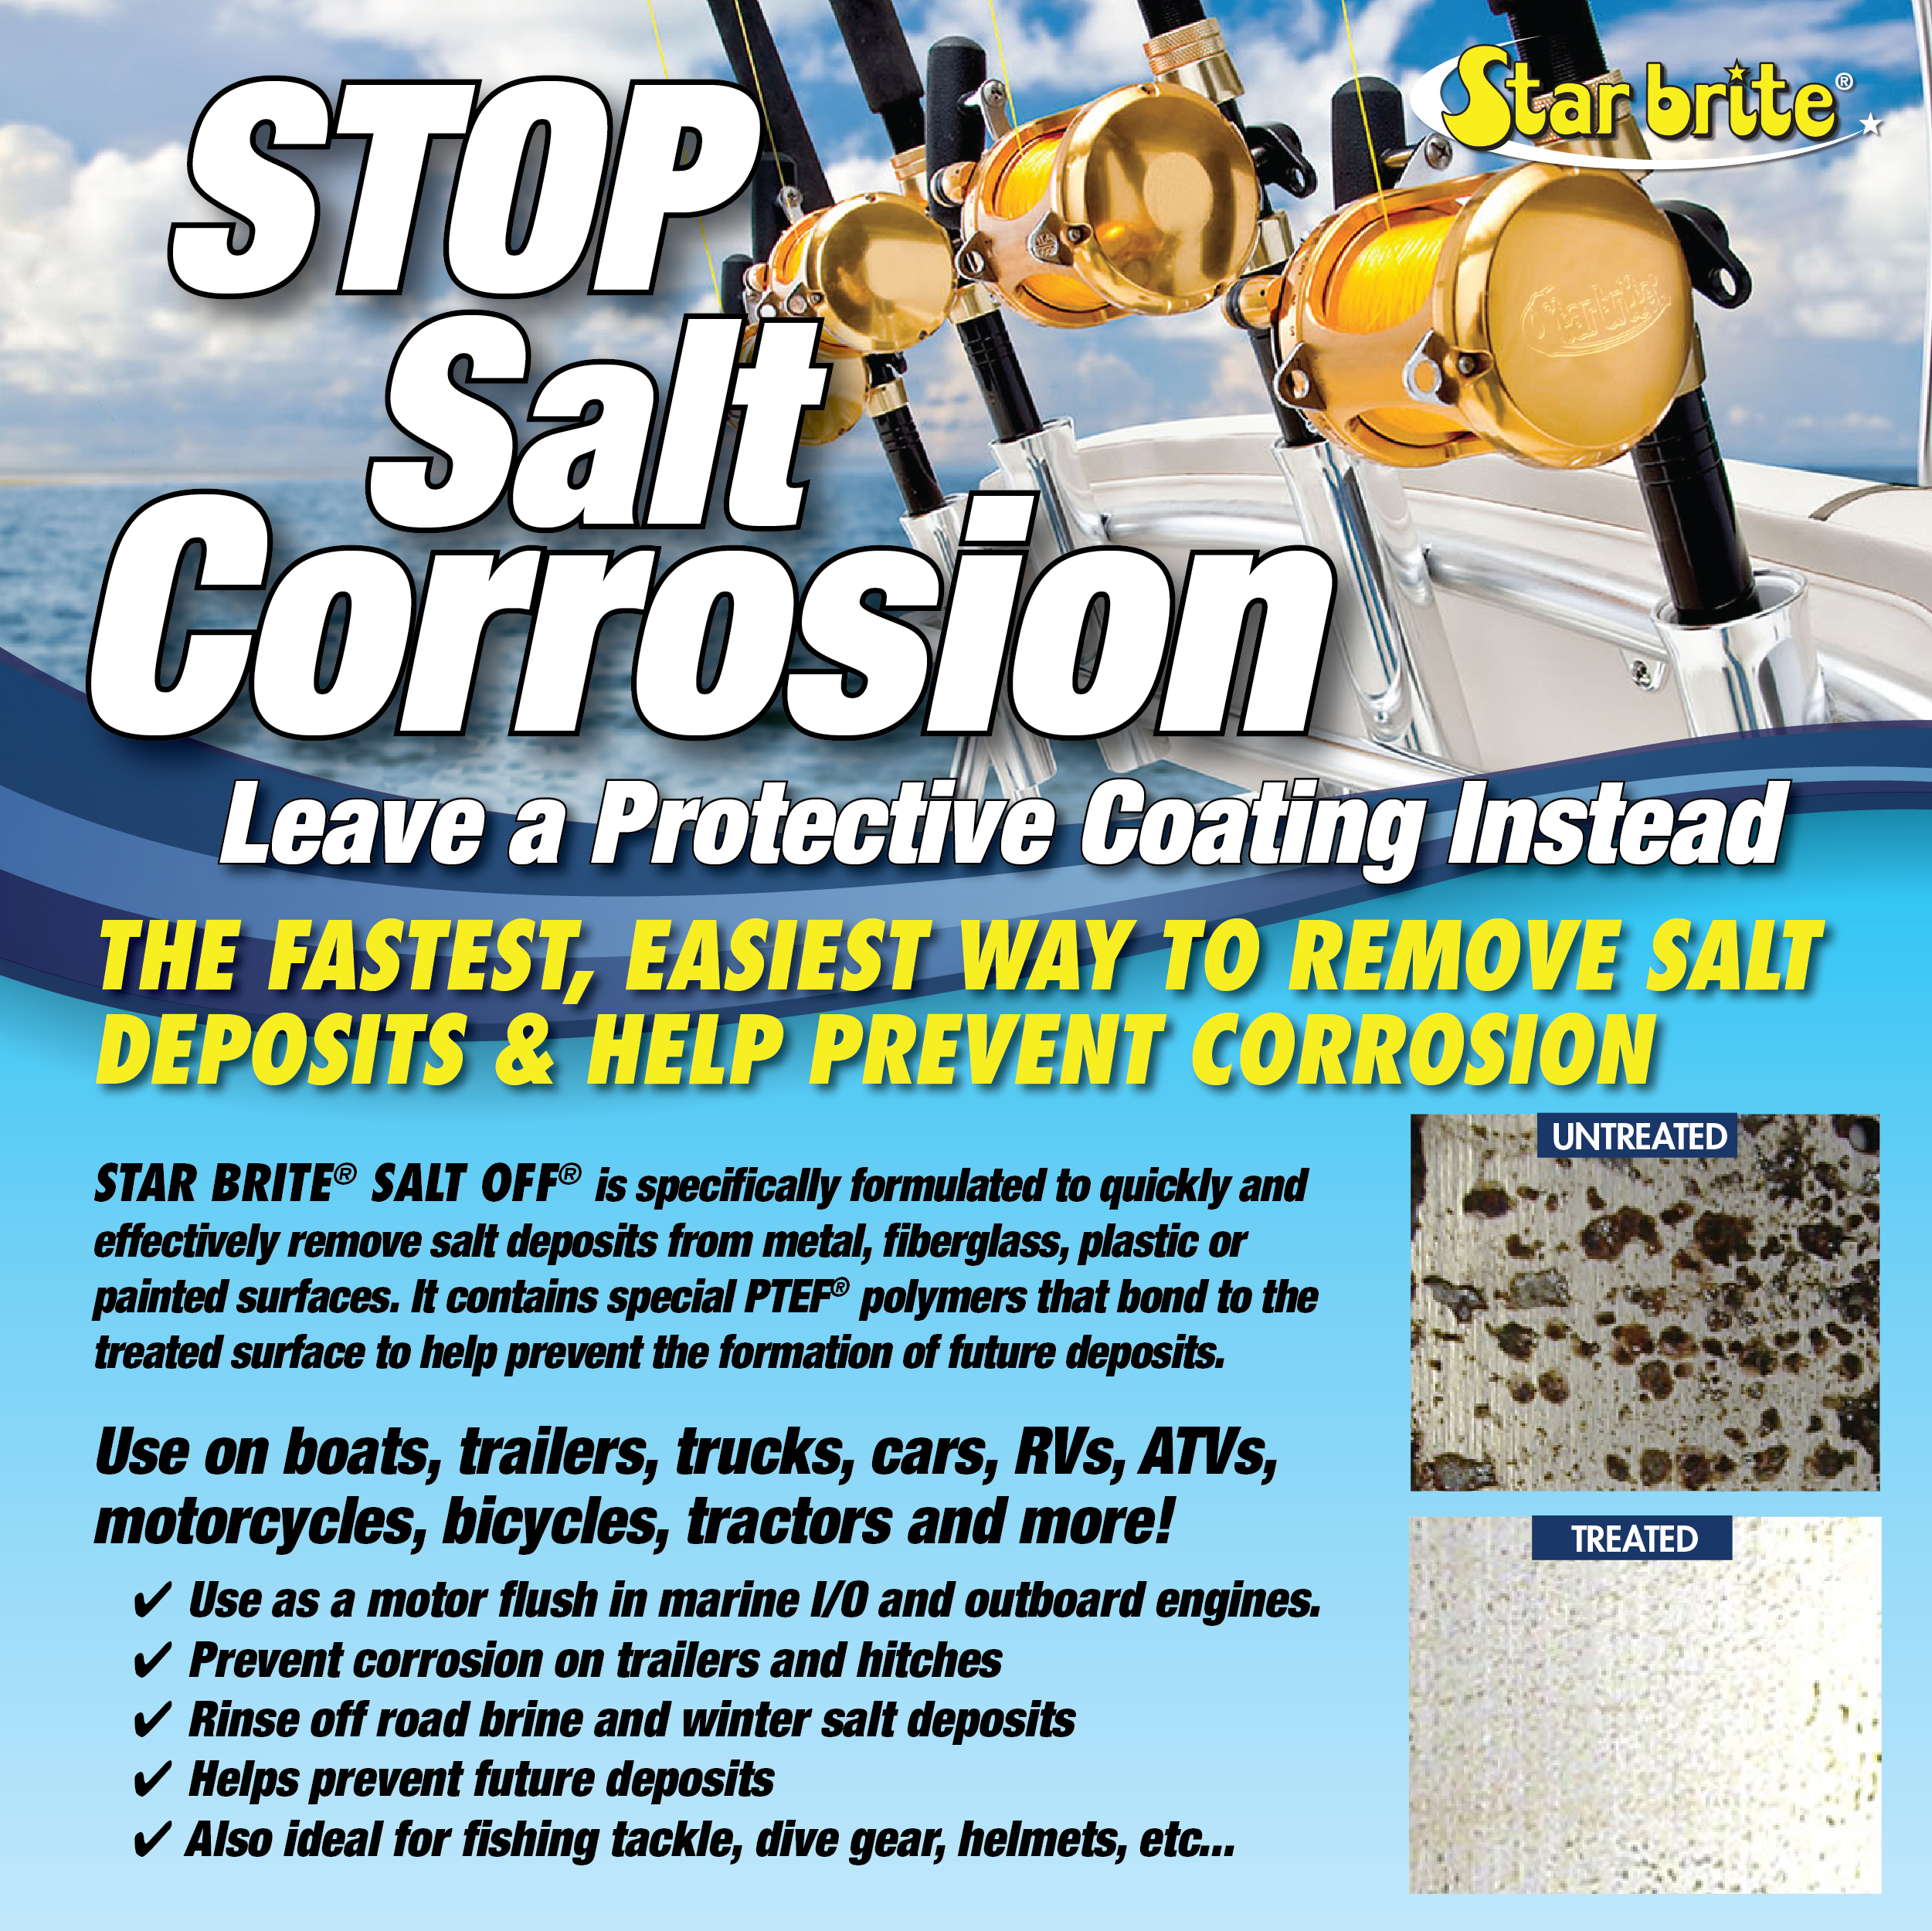 Star Brite 3005.1625 22 oz 093922 Salt Off Concentrate with